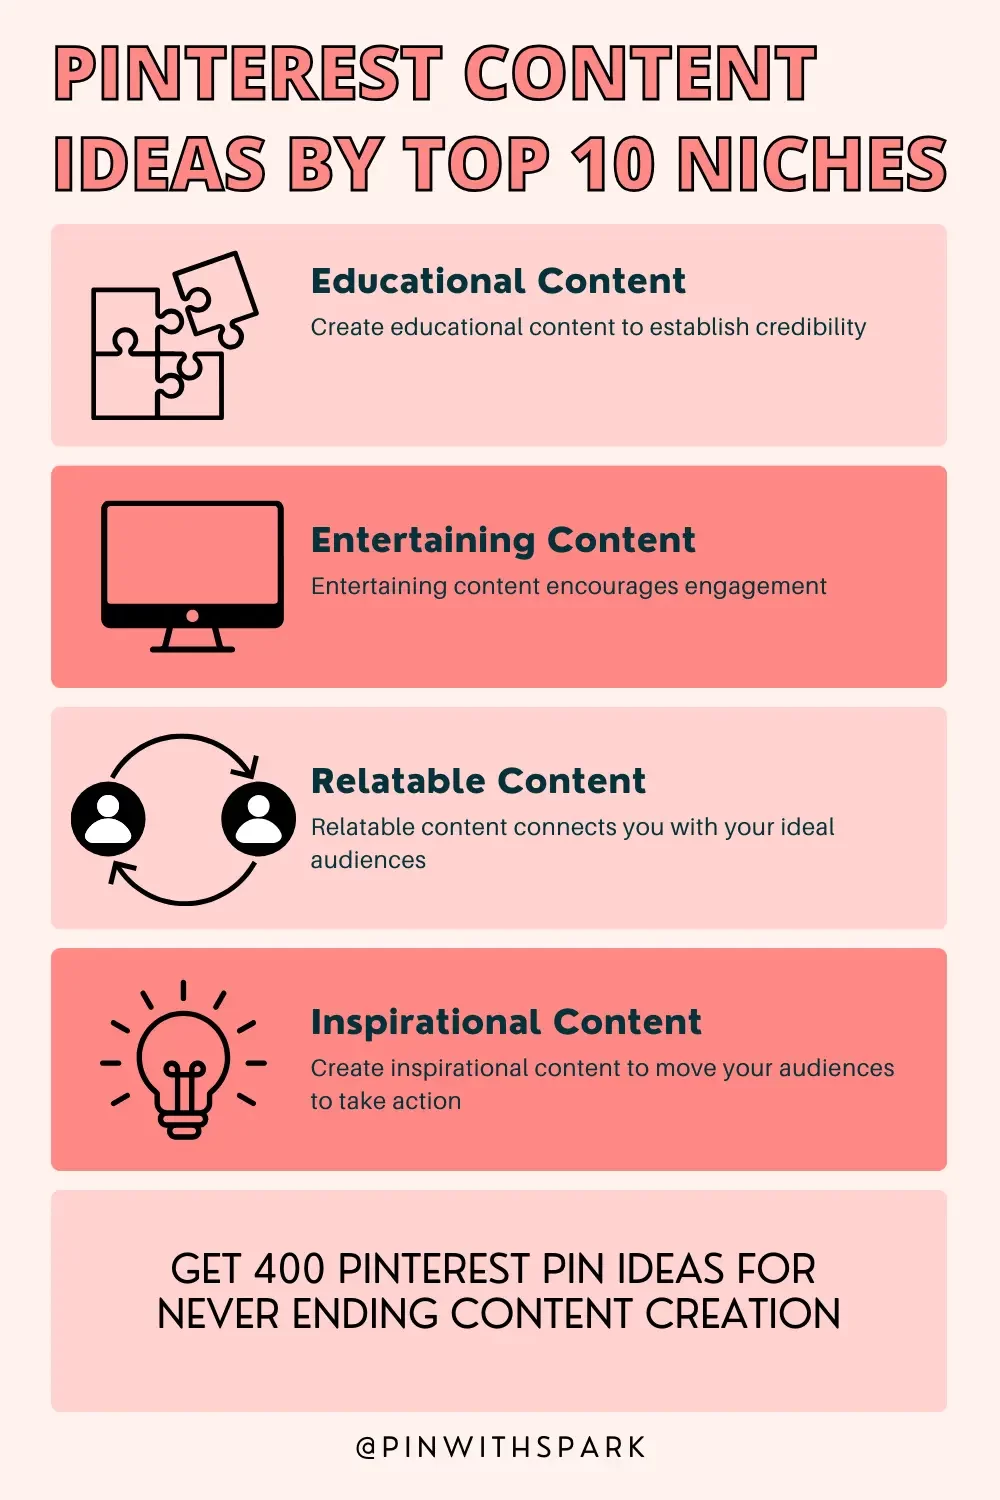 Pinterest content ideas by top 10 niches